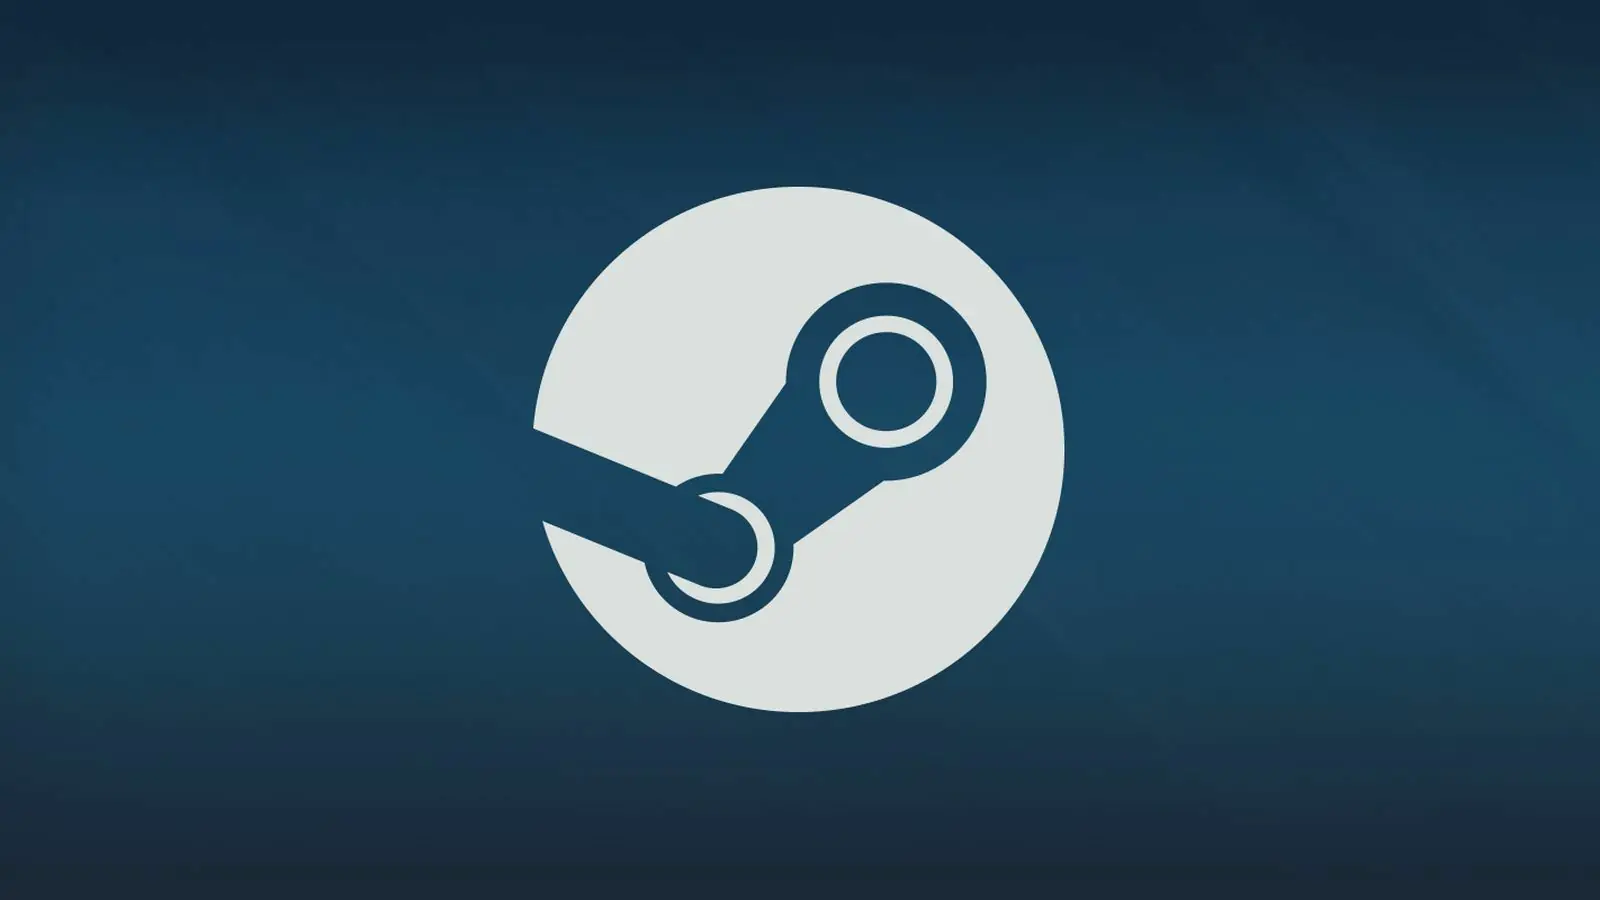 Steam icon with blue background